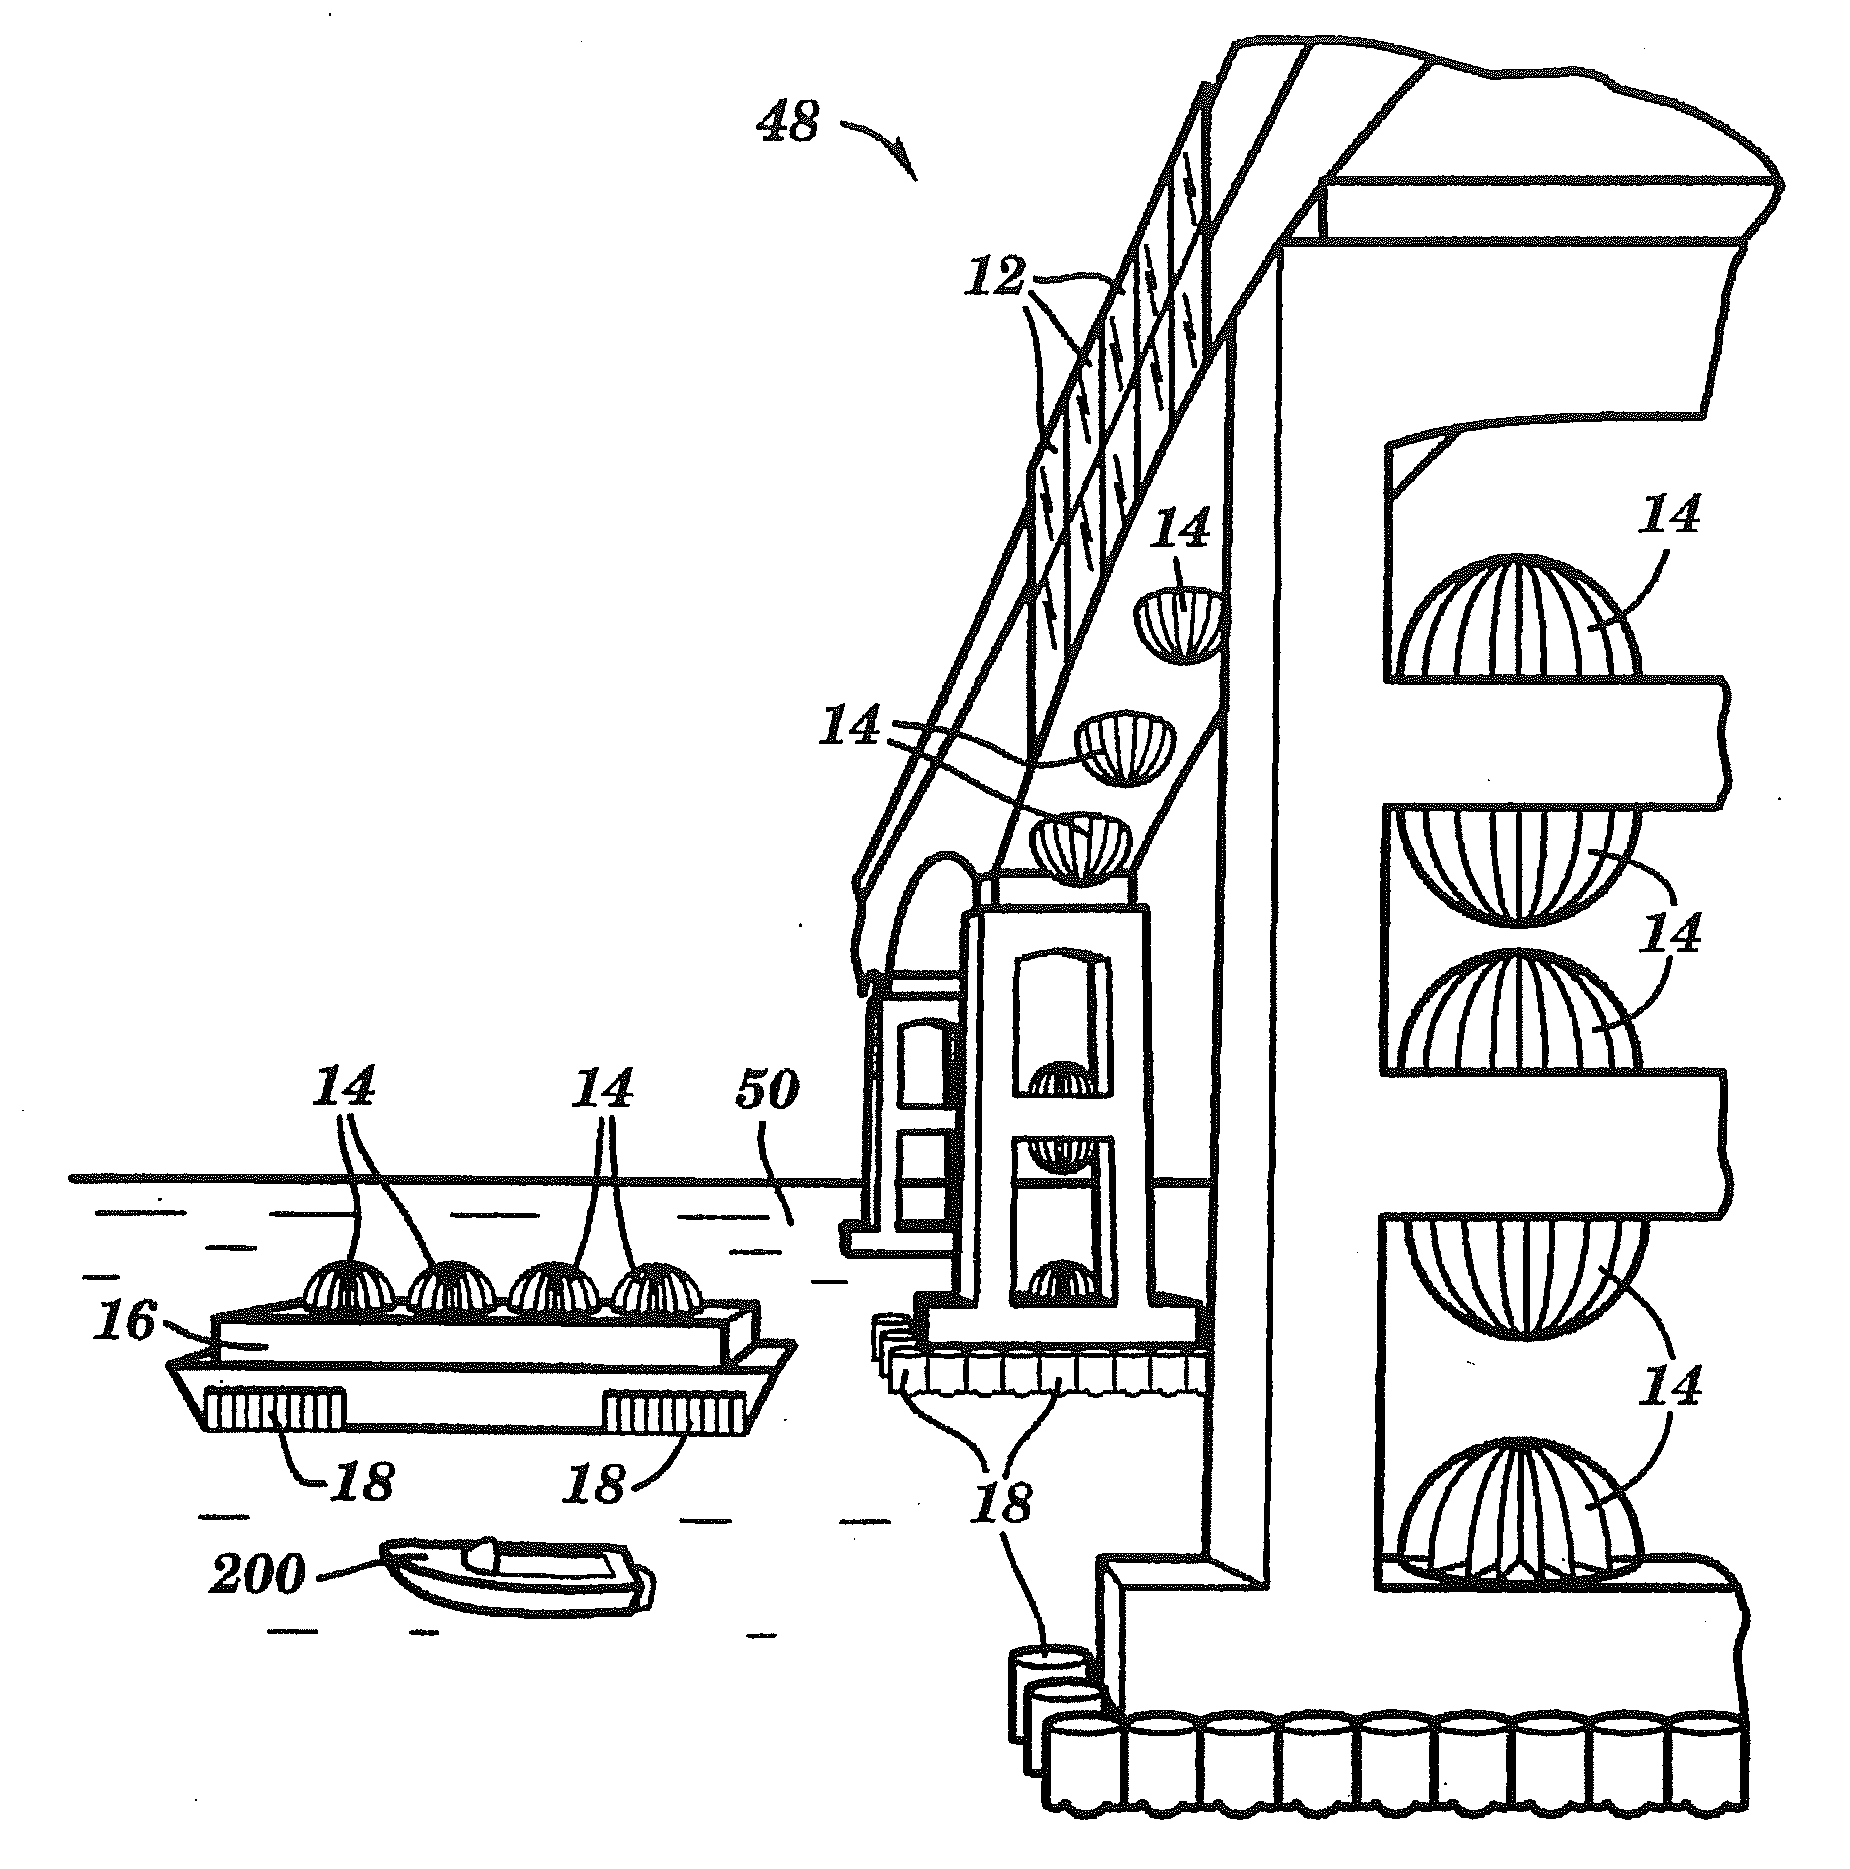 Facility for refueling of clean air vehicles/marine craft and generation and storage of power